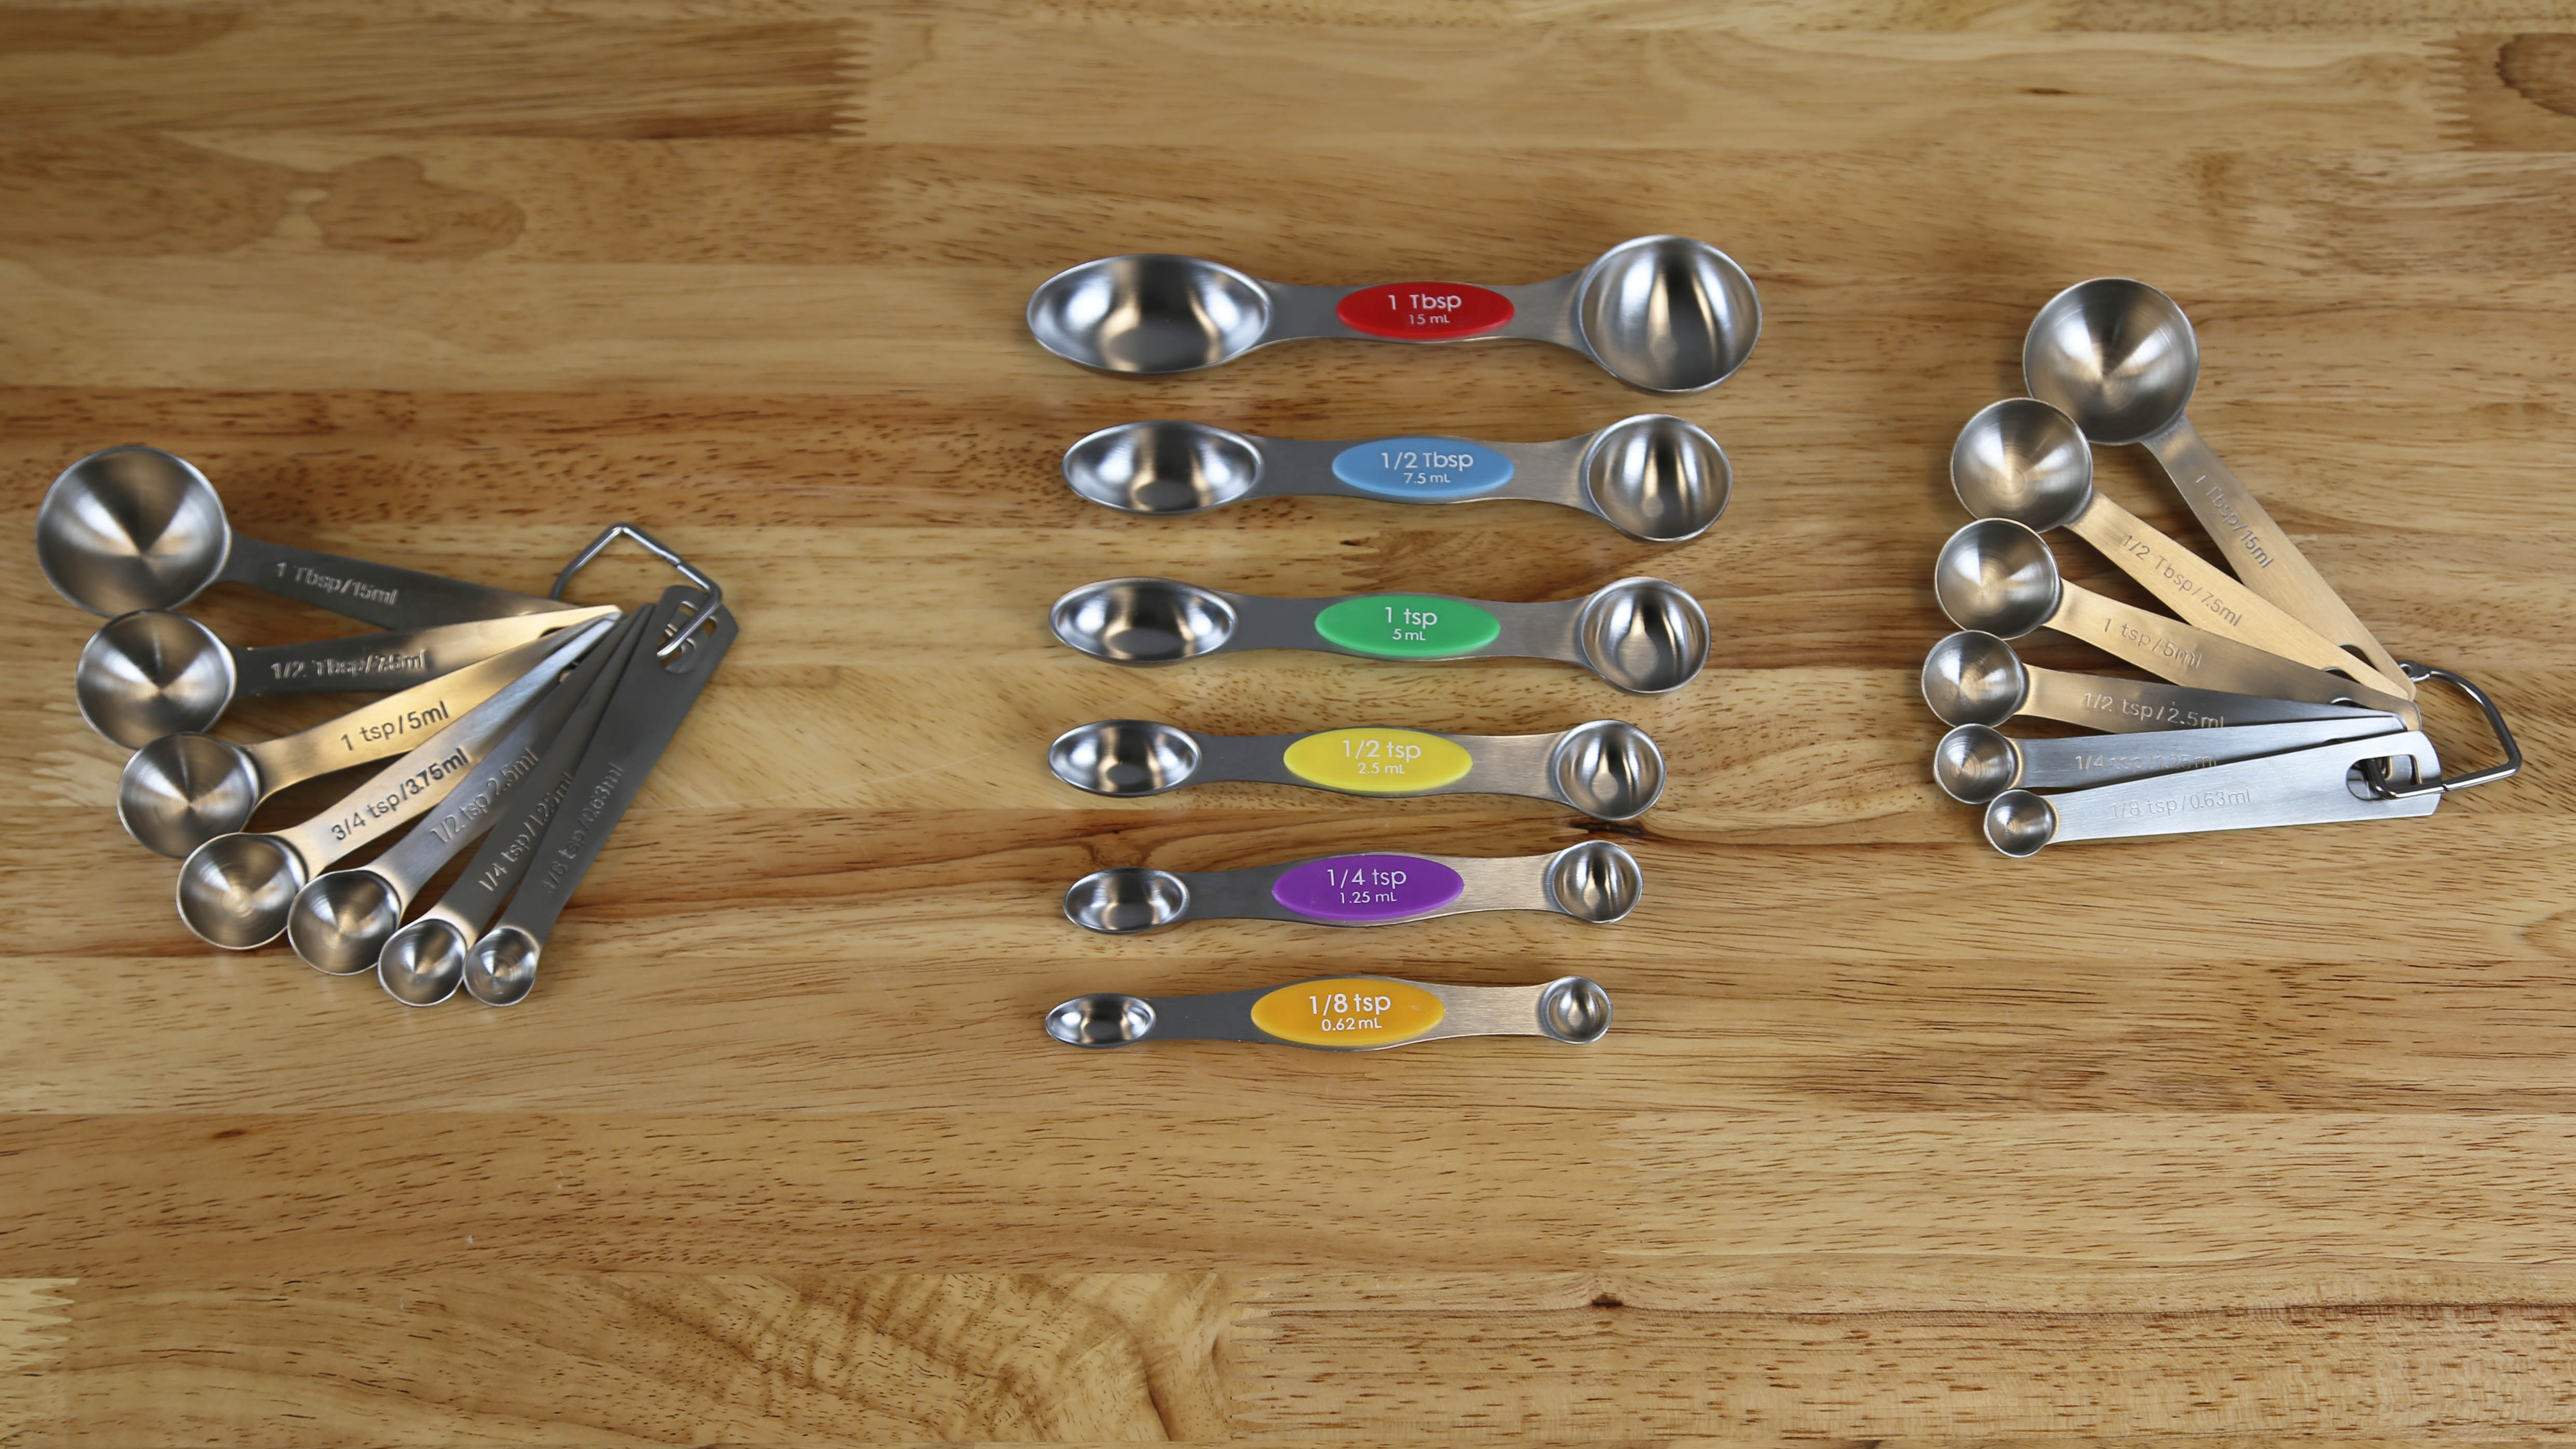 The Best Measuring Spoons